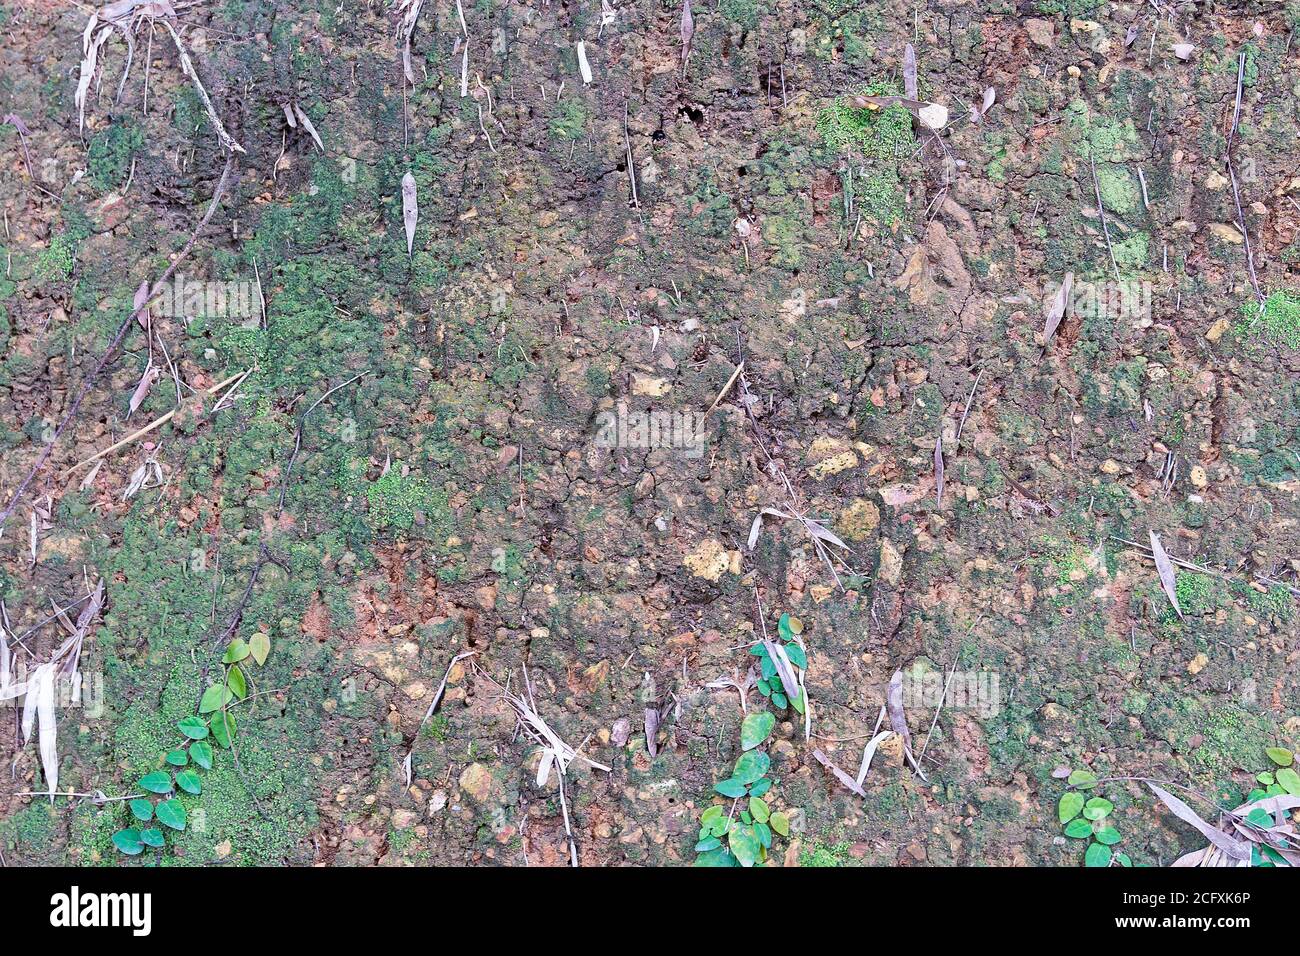 The pristine nature of Asia. Soil, mosses, and plants on the surface of the tropical. Nature wall texture, background image, close up. Stock Photo